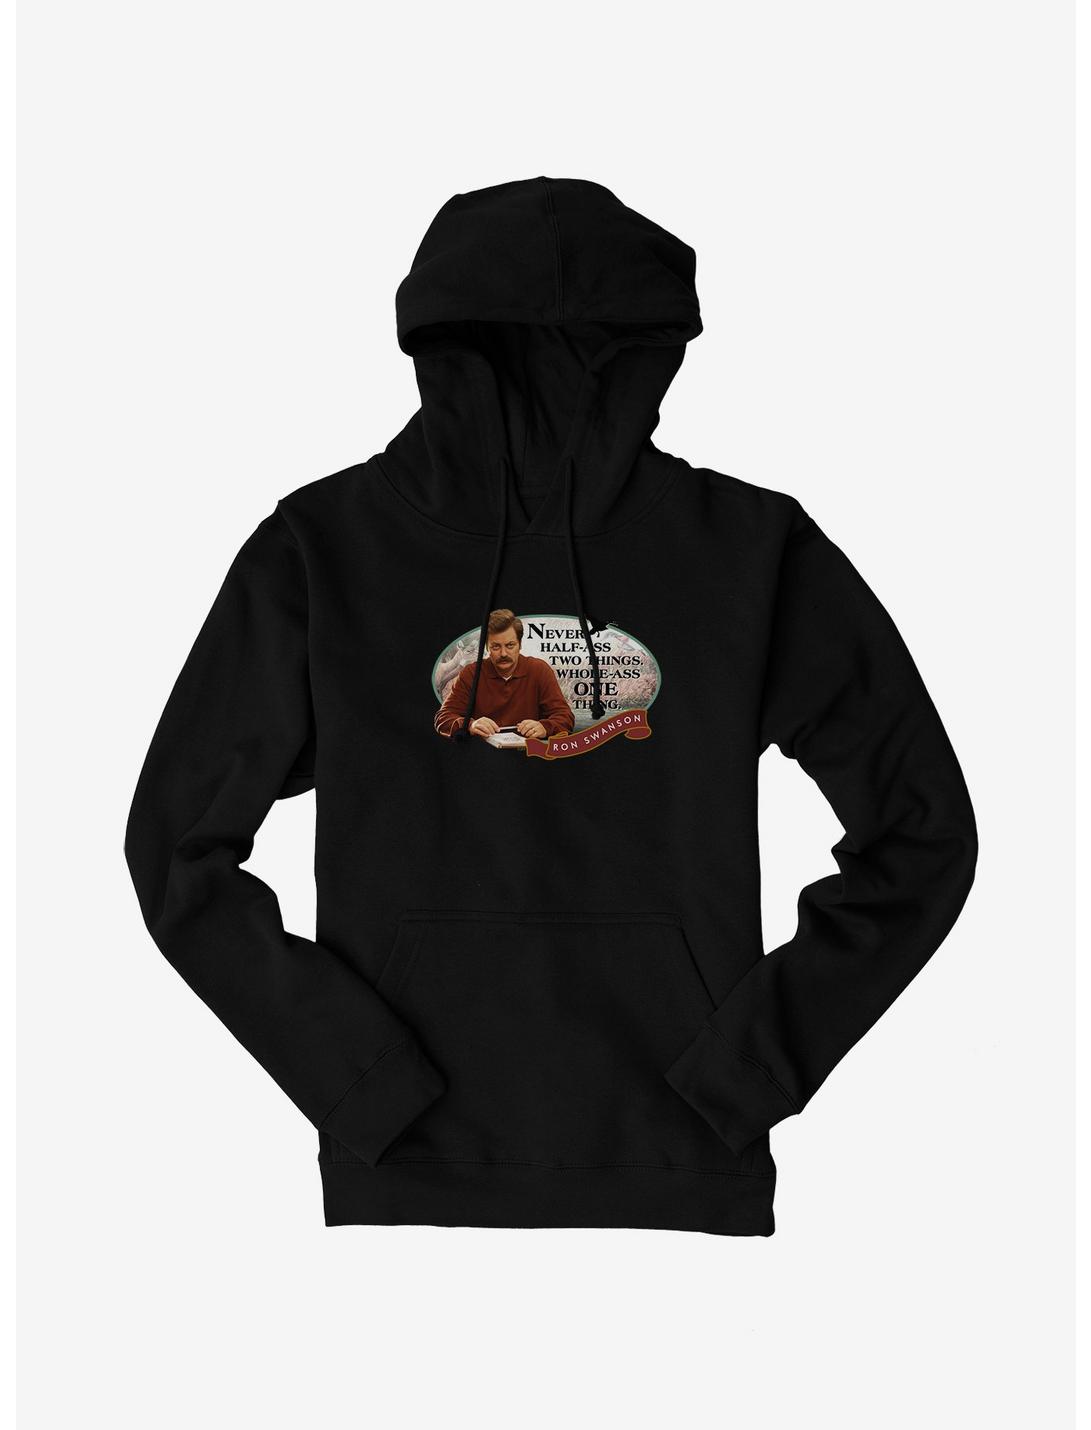 Parks And Recreation Whole-Ass One Thing Hoodie, , hi-res